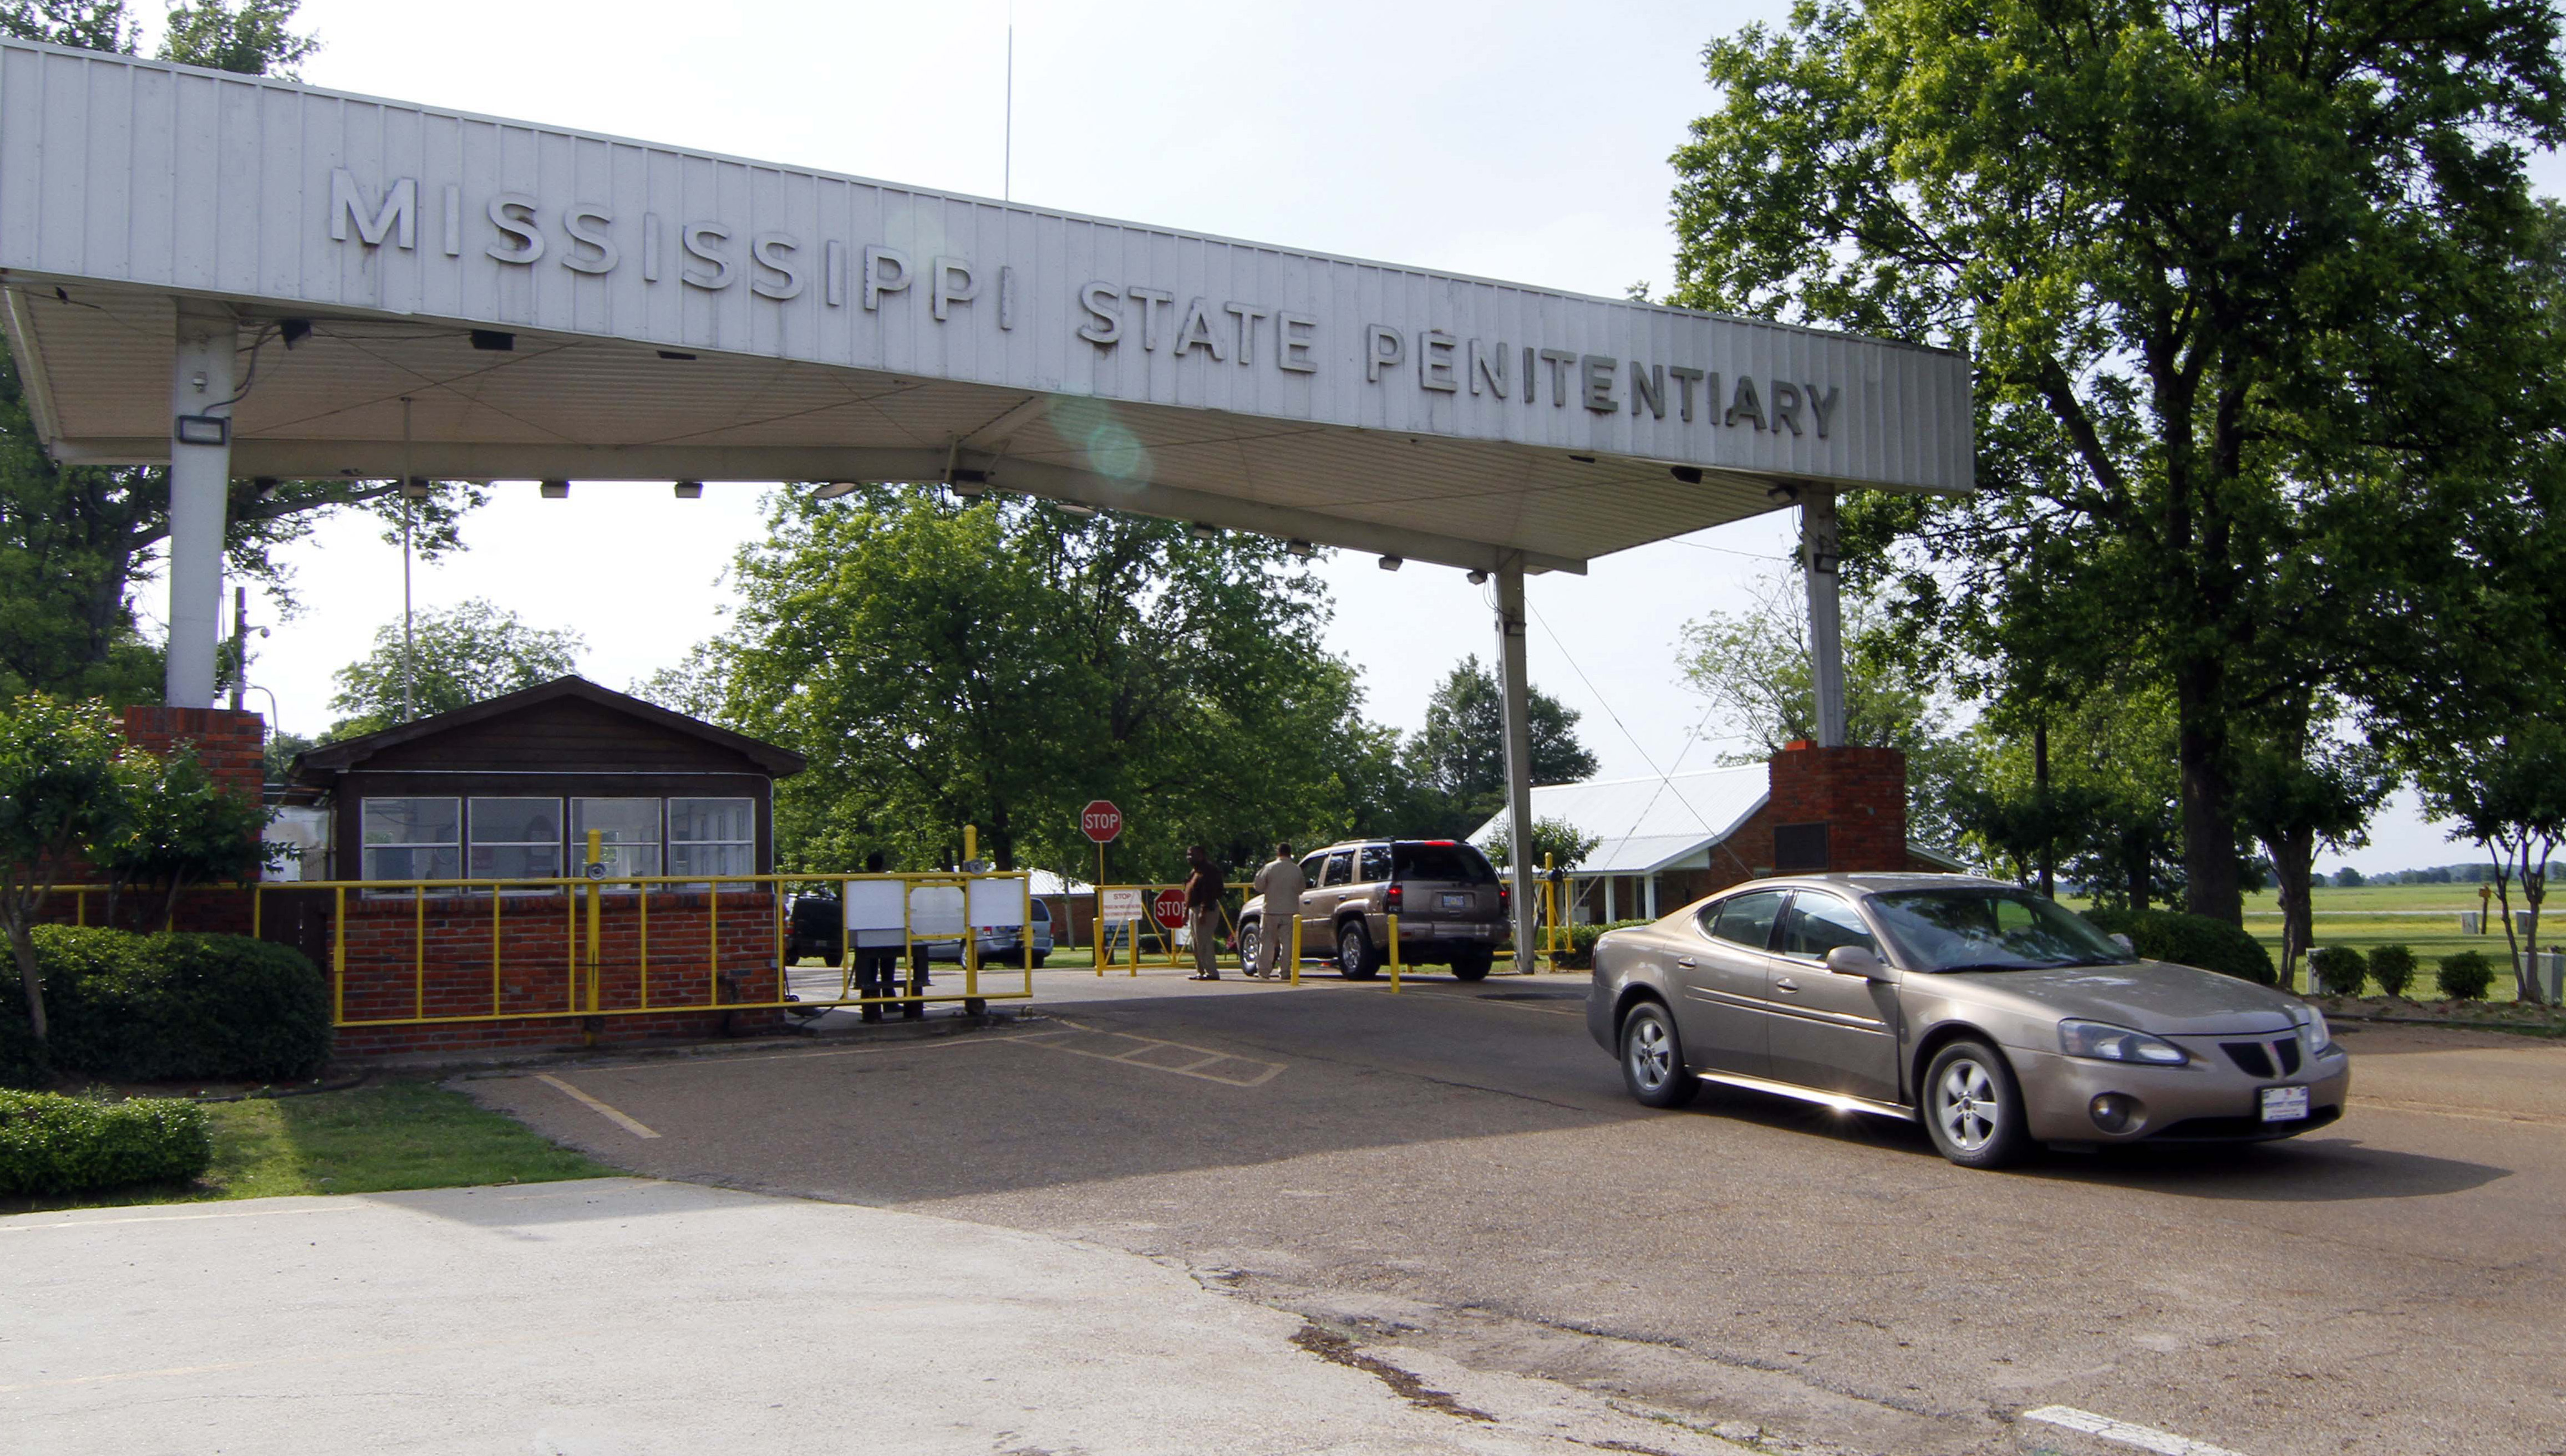 Traffic moves past the front of the Mississippi State Penitentiary in Parchman, Miss. on May 19, 2010. Another Mississippi inmate died at the hands of a fellow inmate on, Jan. 2, 2020, this time, at the penitentiary, bringing the death toll to four amid disturbances over the past week in the state prison system. (Rogelio V. Solis—AP)